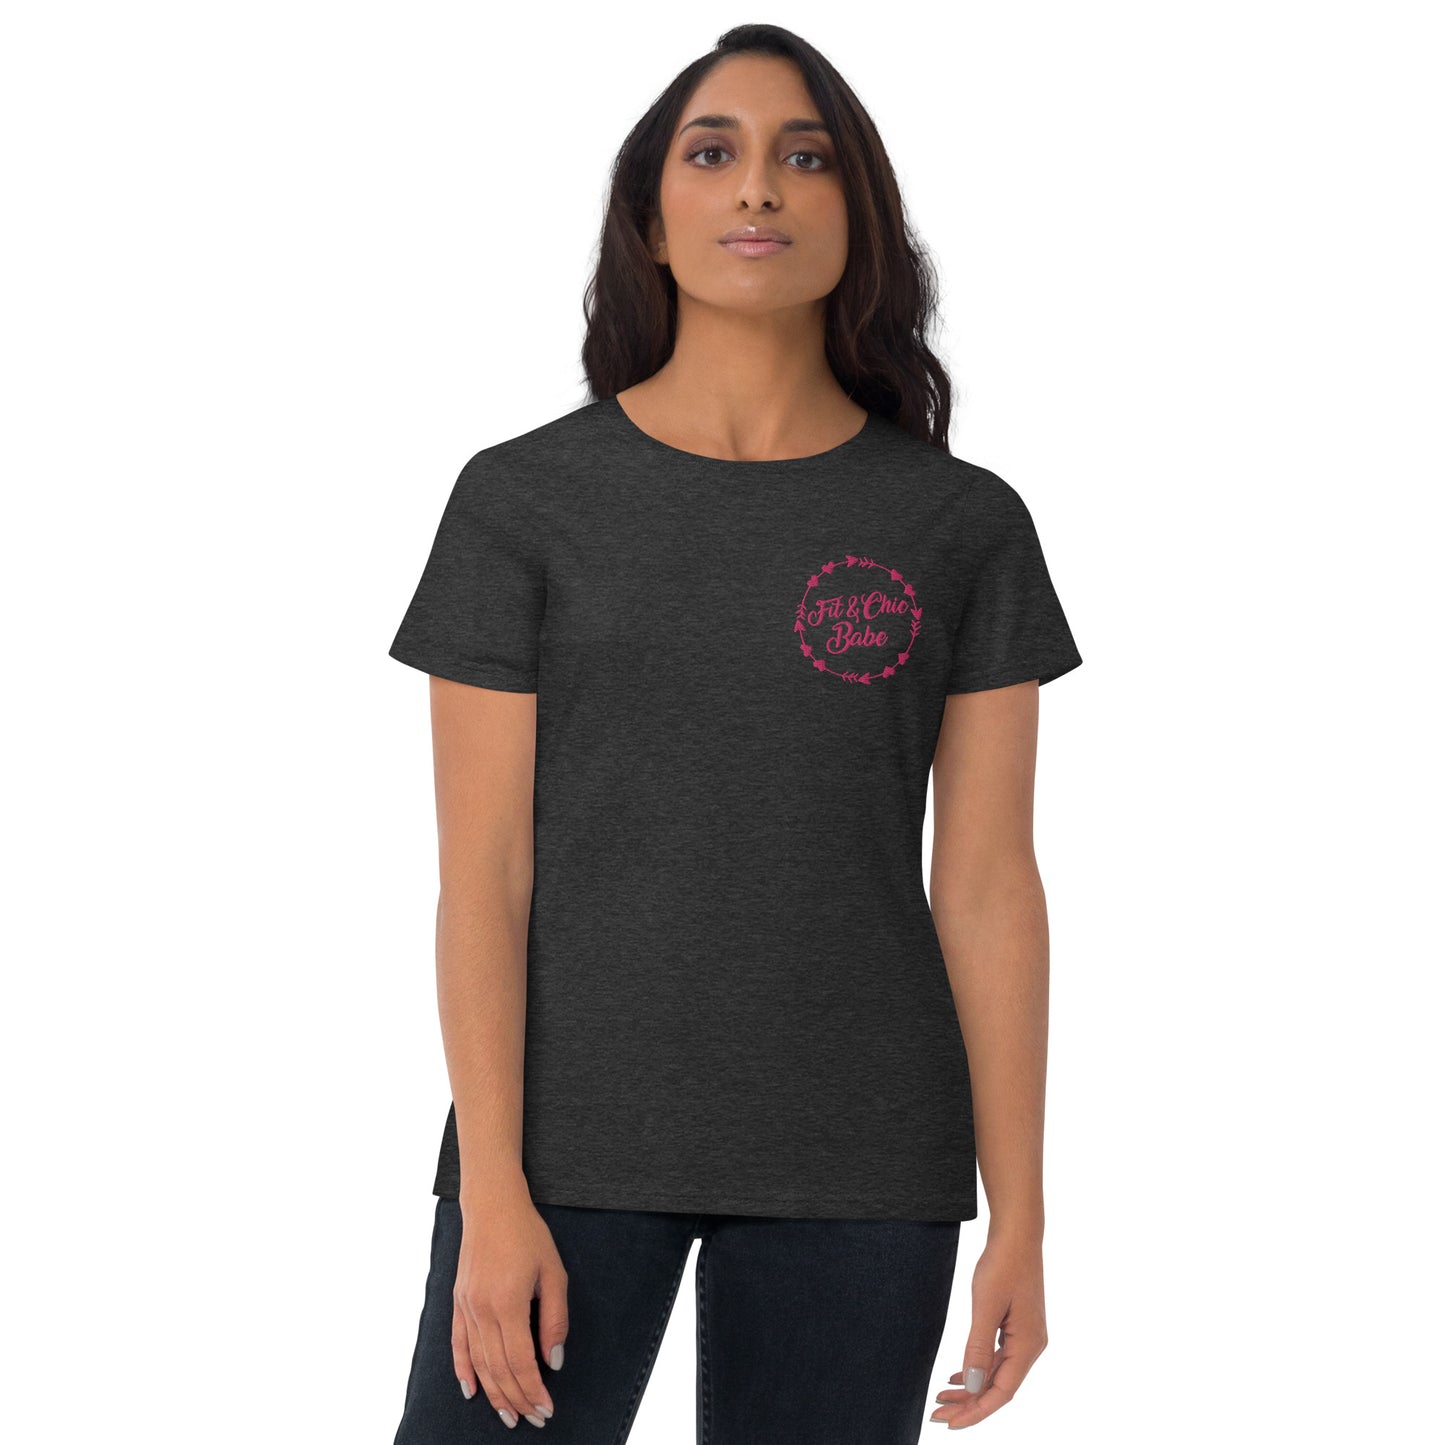 Fit and Chic Women's short sleeve t-shirt